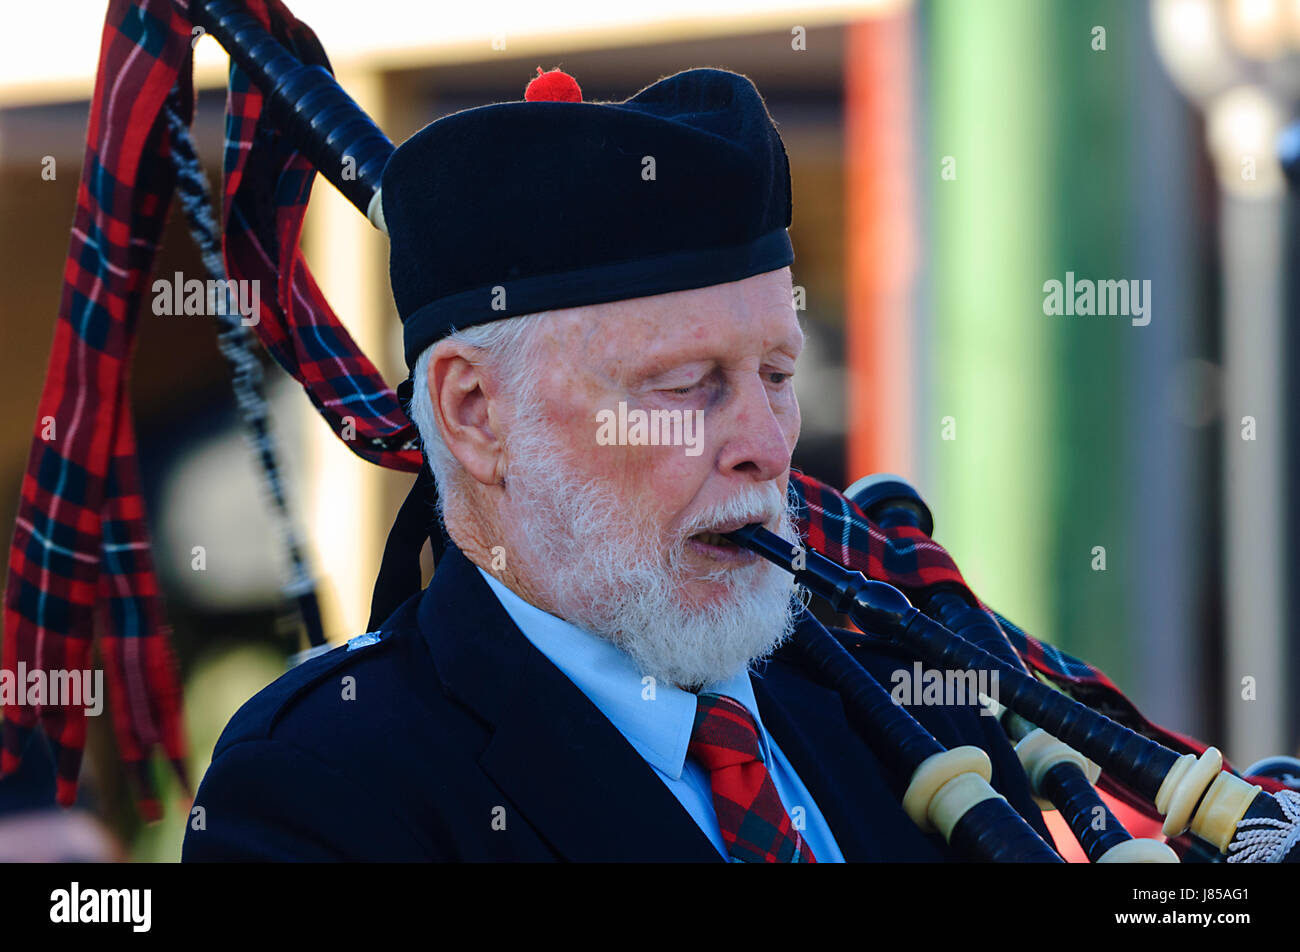 Scottish piper wearing a Tam o shanter, Celtic Music Festival, Berry, New South Wales, NSW, Australia Stock Photo